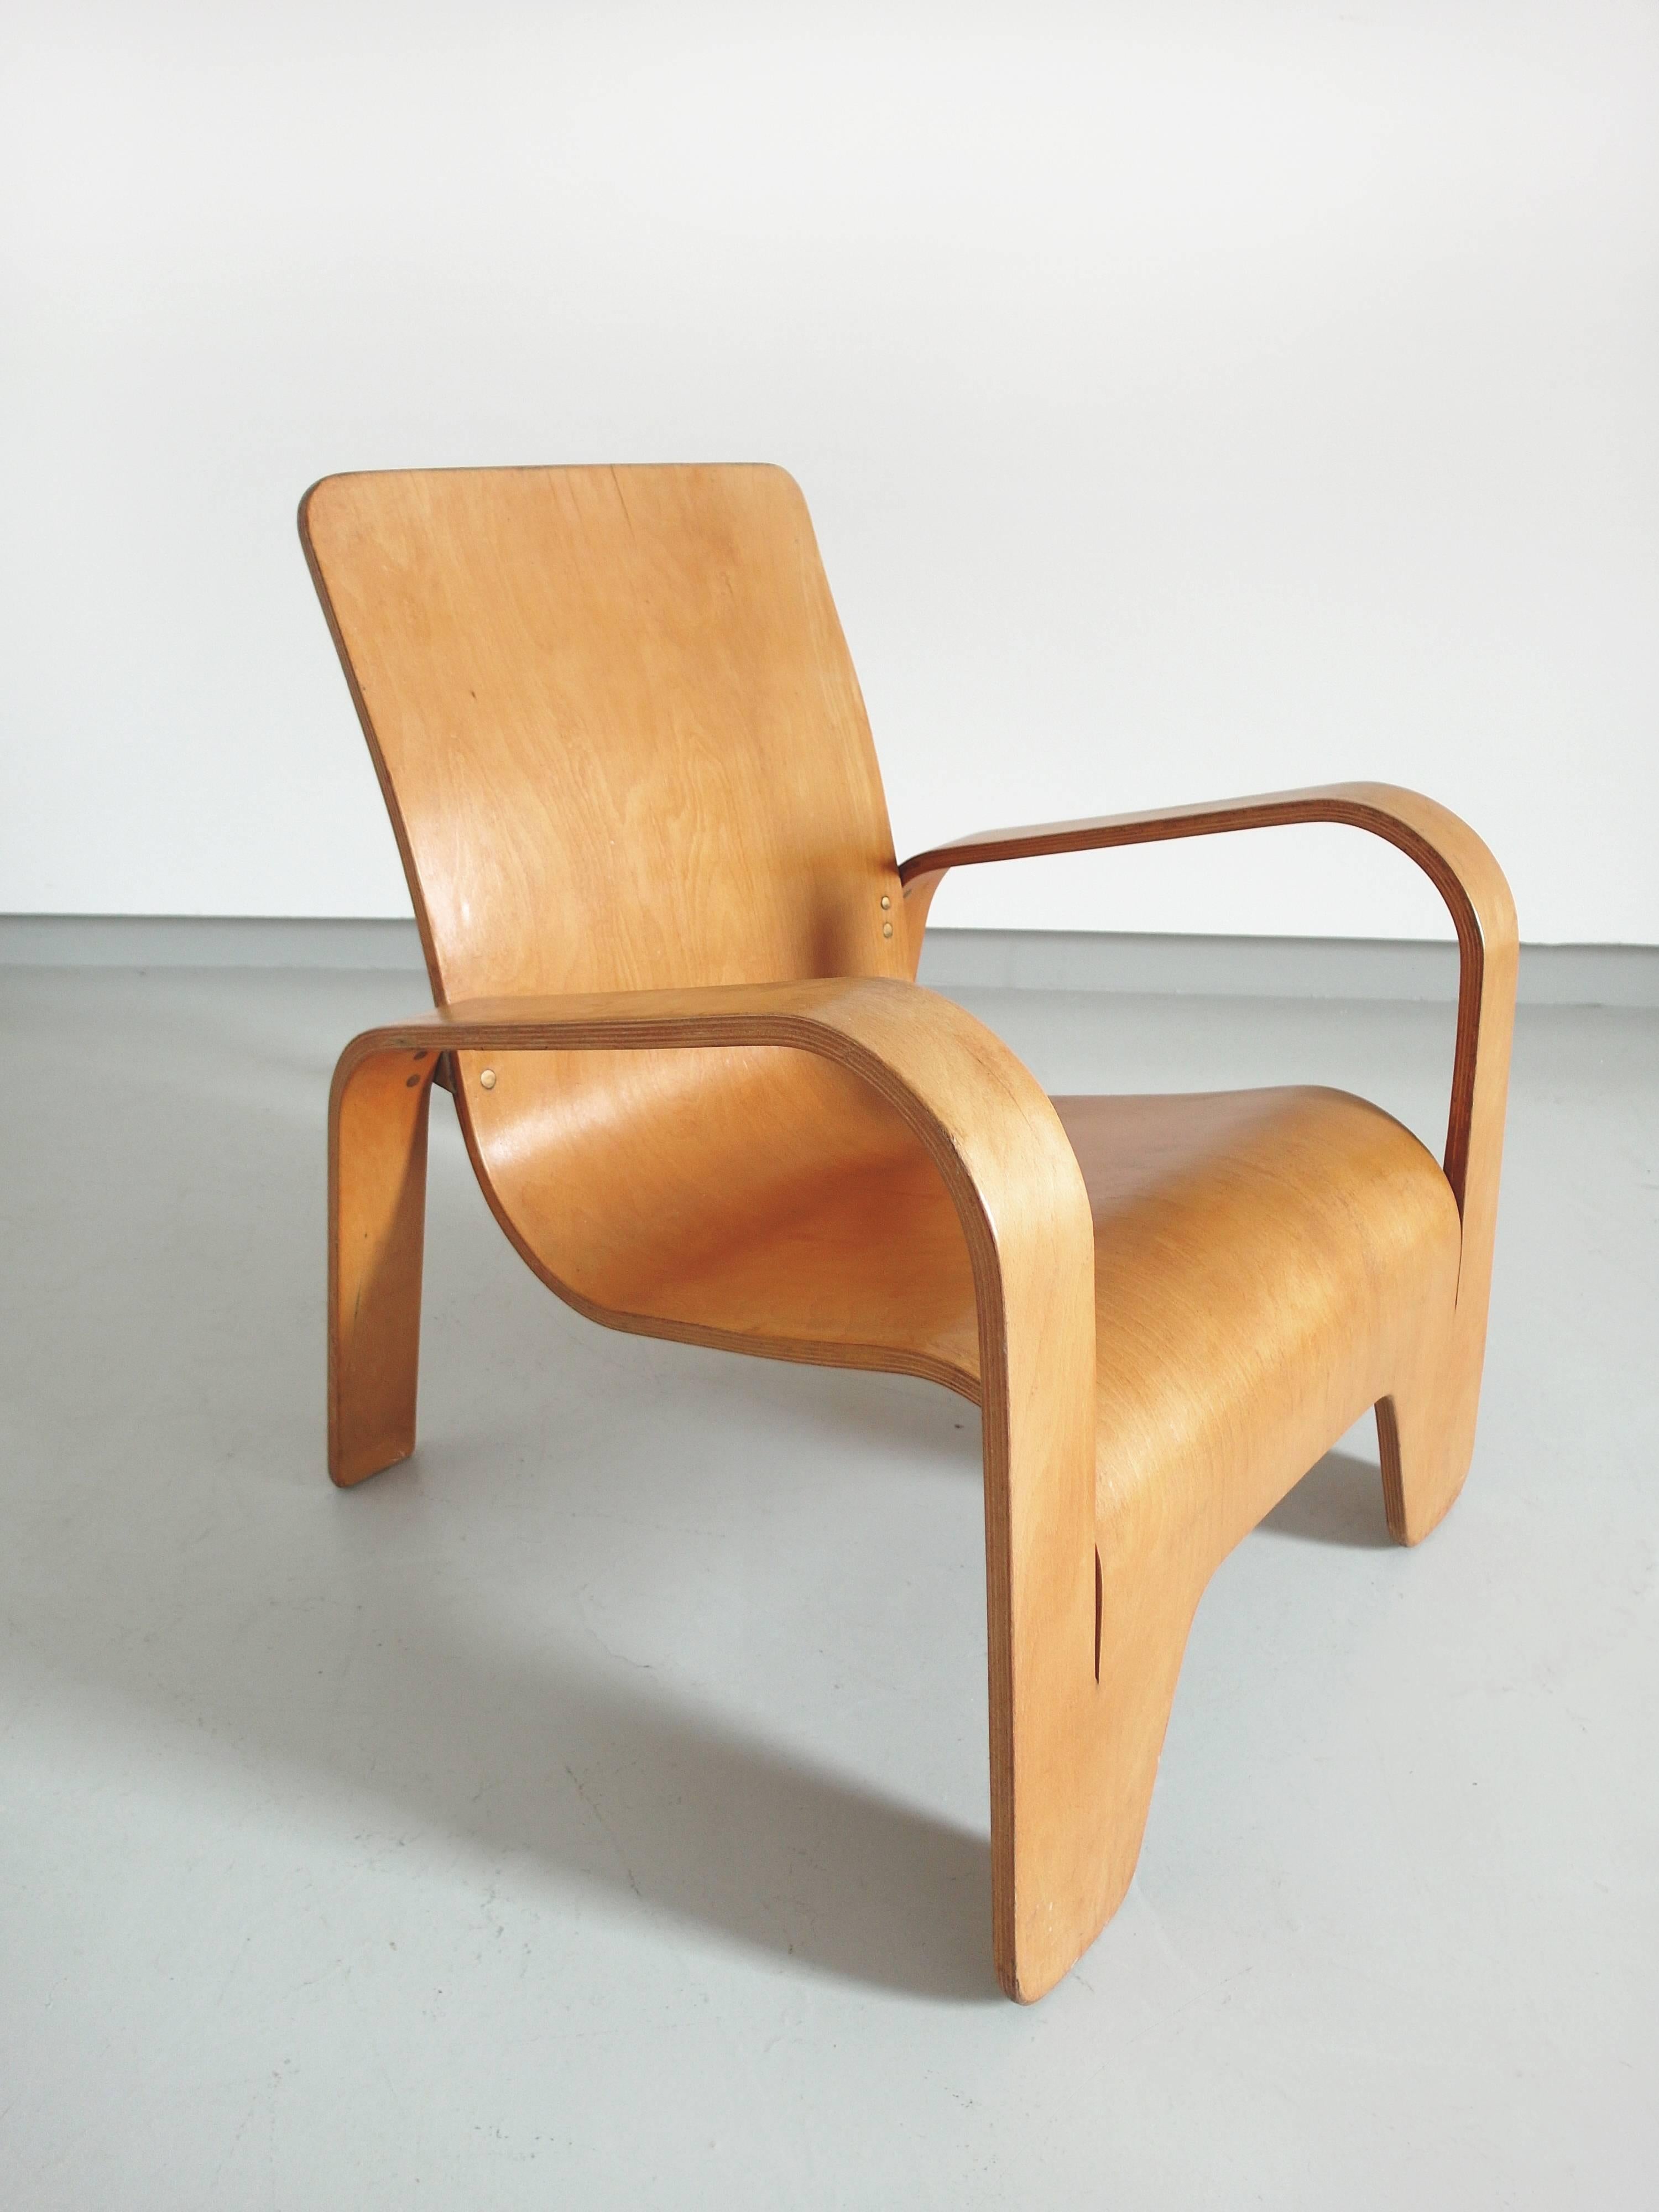 Important Dutch modernist chair, the LaWo1 chair designed by Han Pieck for Lawo Ommen, The Netherlands 1946. The LaWo1 chair is brilliantly designed and made from several layers of birch plywood. The rear legs are fixed to the seat back by brass